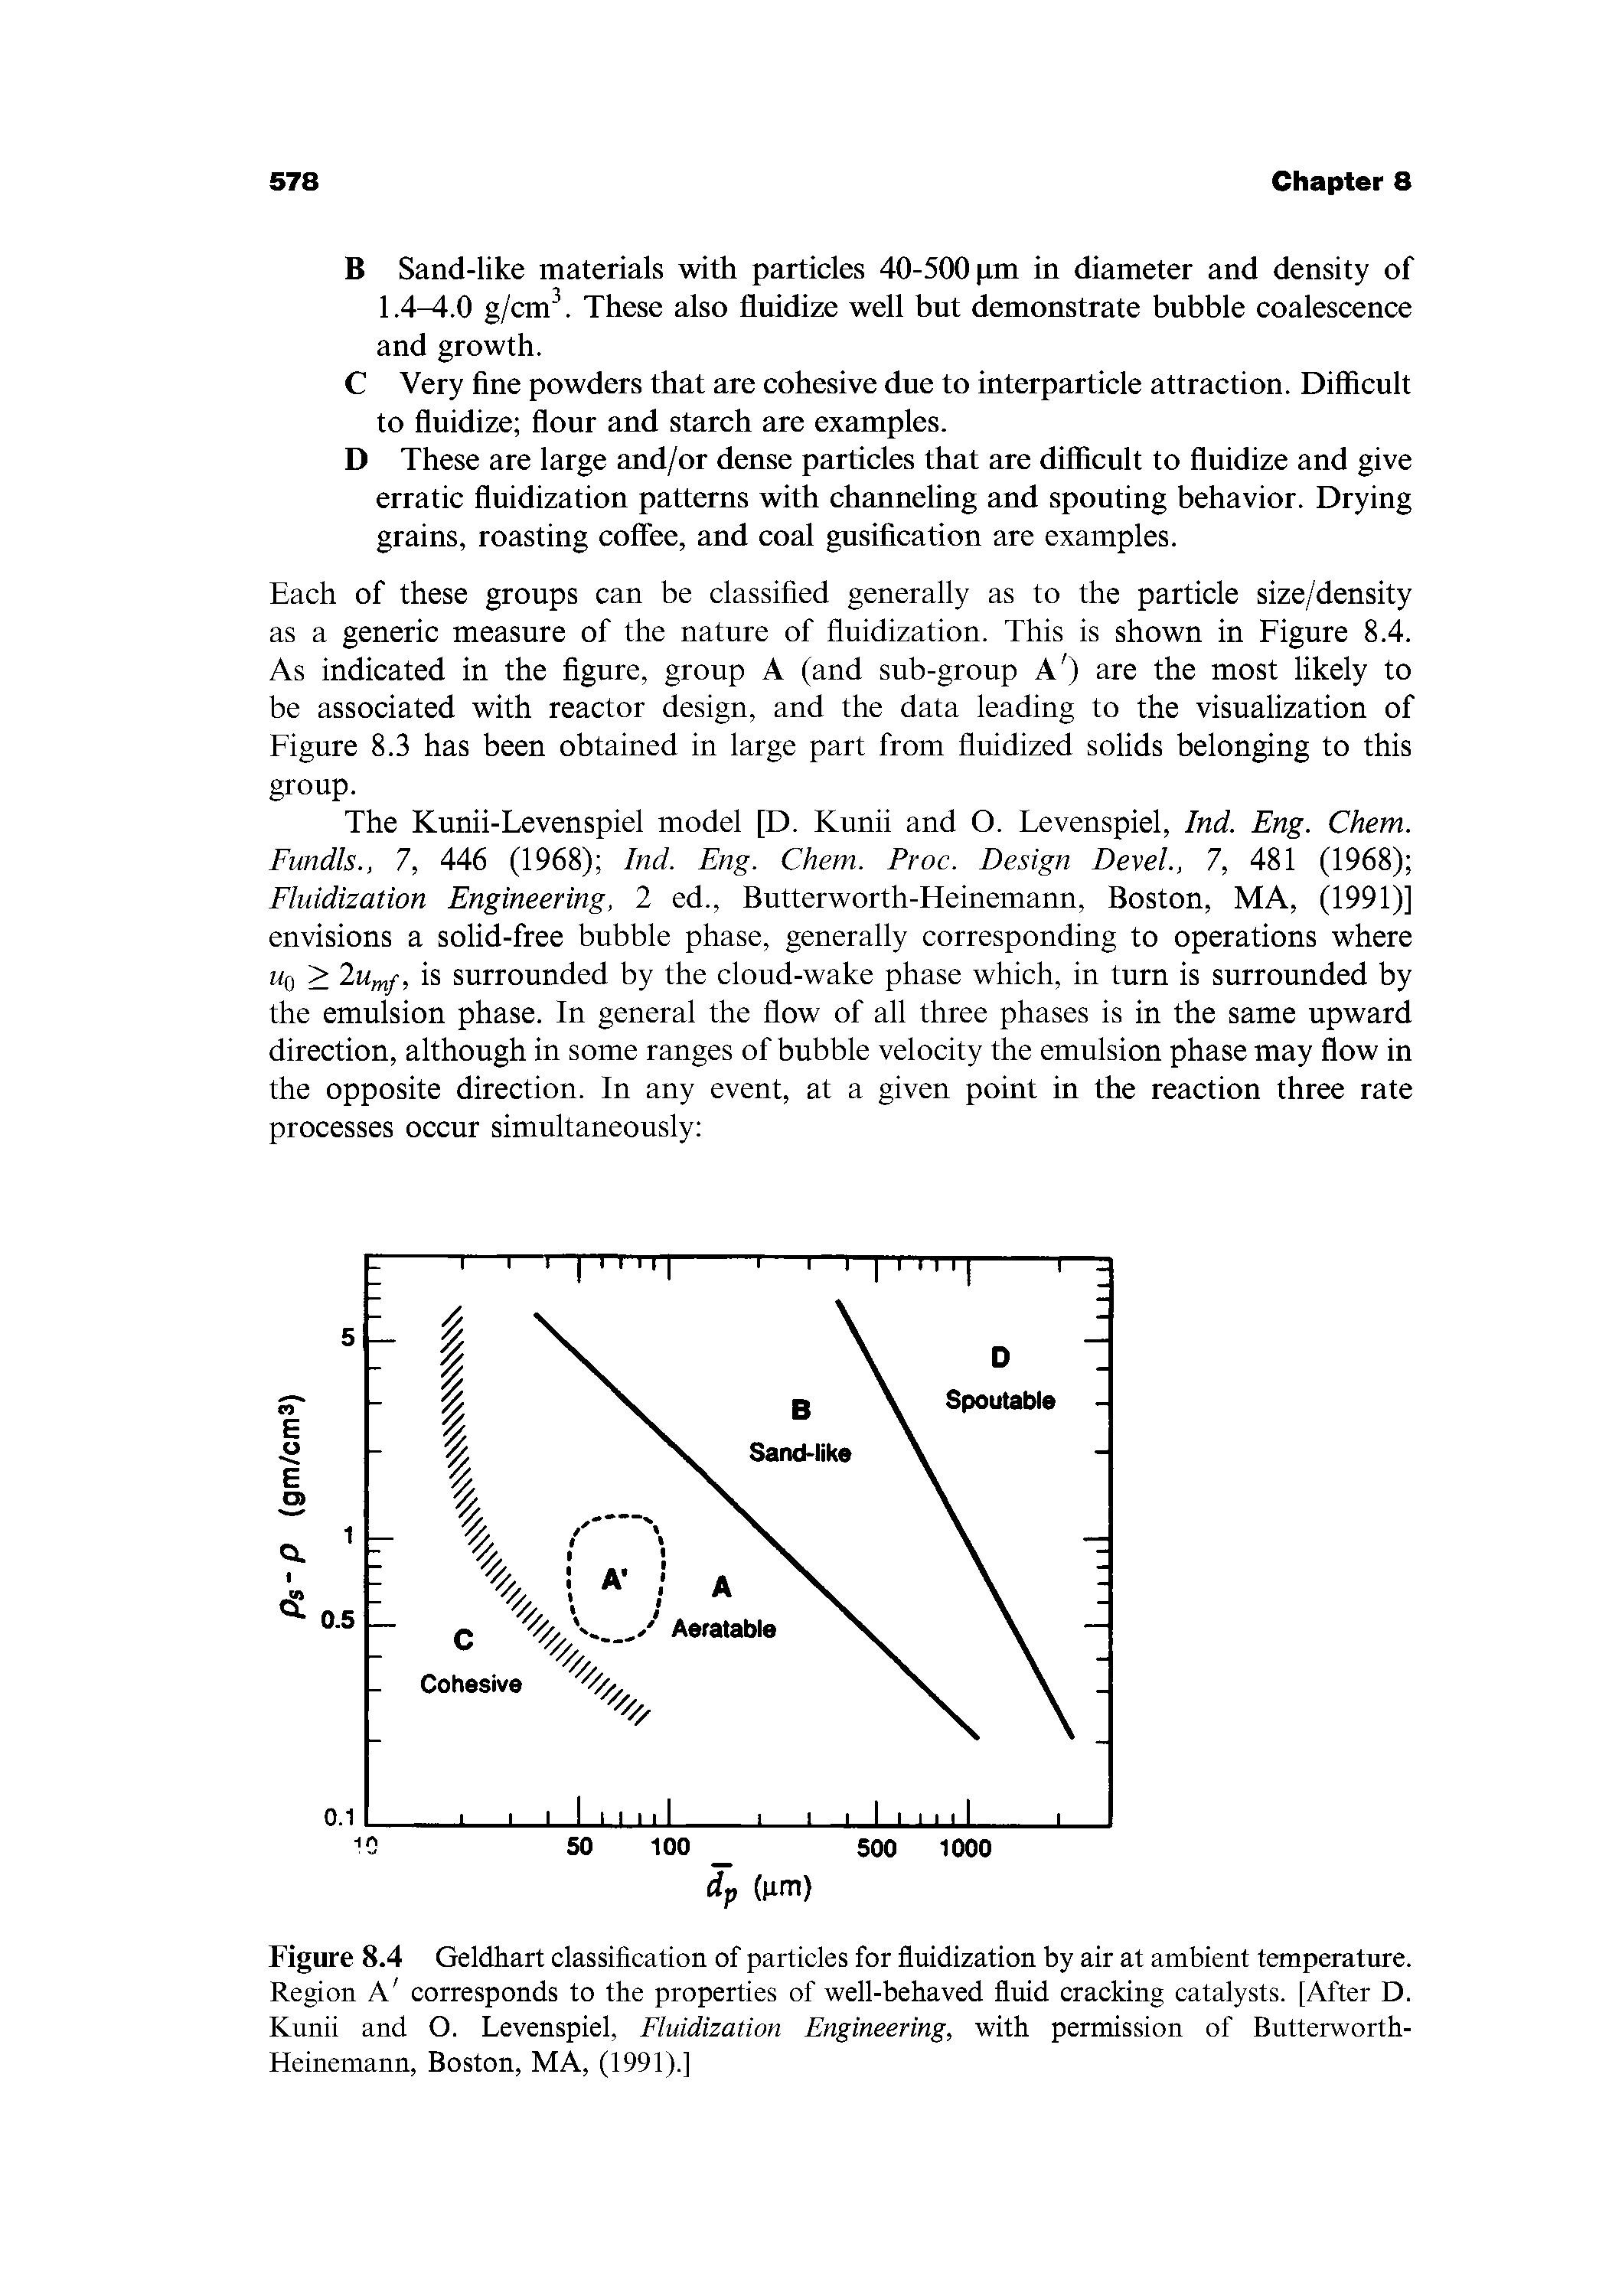 Figure 84 Greldhart classification of particles for fluidization by air at ambient temperature. Region A corresponds to the properties of well-behaved fluid cracking catalysts. [After D. Kunii and O. Levenspiel, Fluidization Engineering, with permission of Butterworth-Heinemann, Boston, MA, (1991).]...